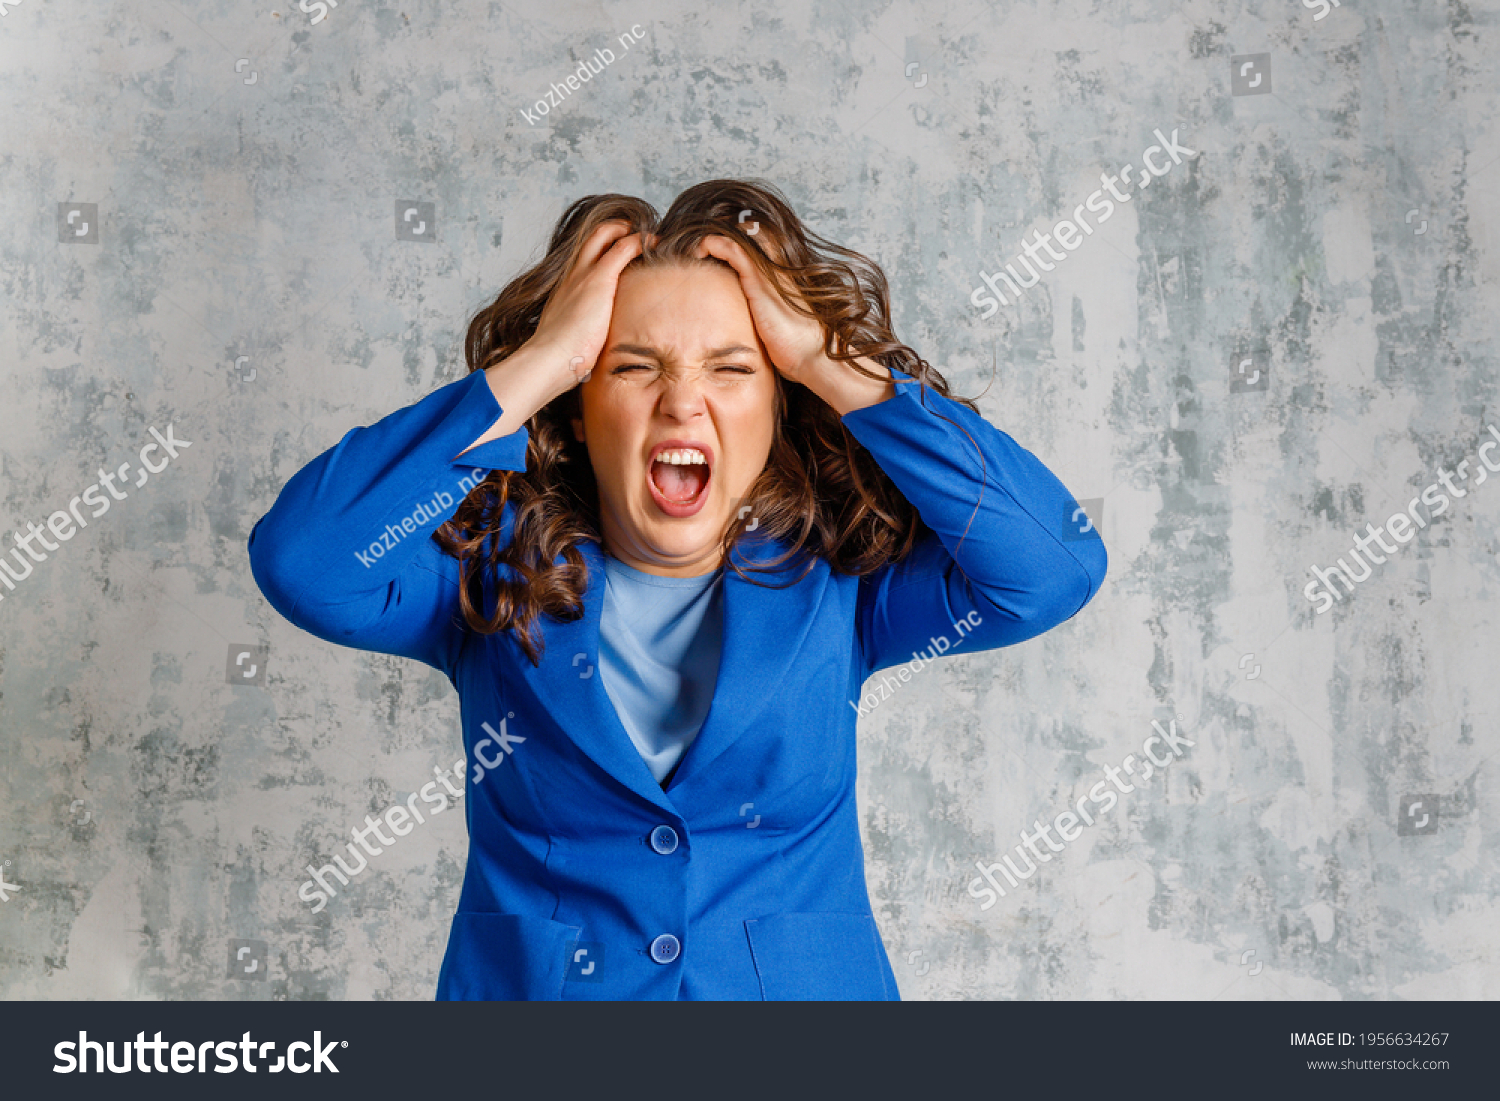 Furious  woman screaming and holding her head. Emotional  lady shouting in anger, being aggressive or mad, suffering from stress. headache. The young woman is angry and screaming, holding her head. #1956634267